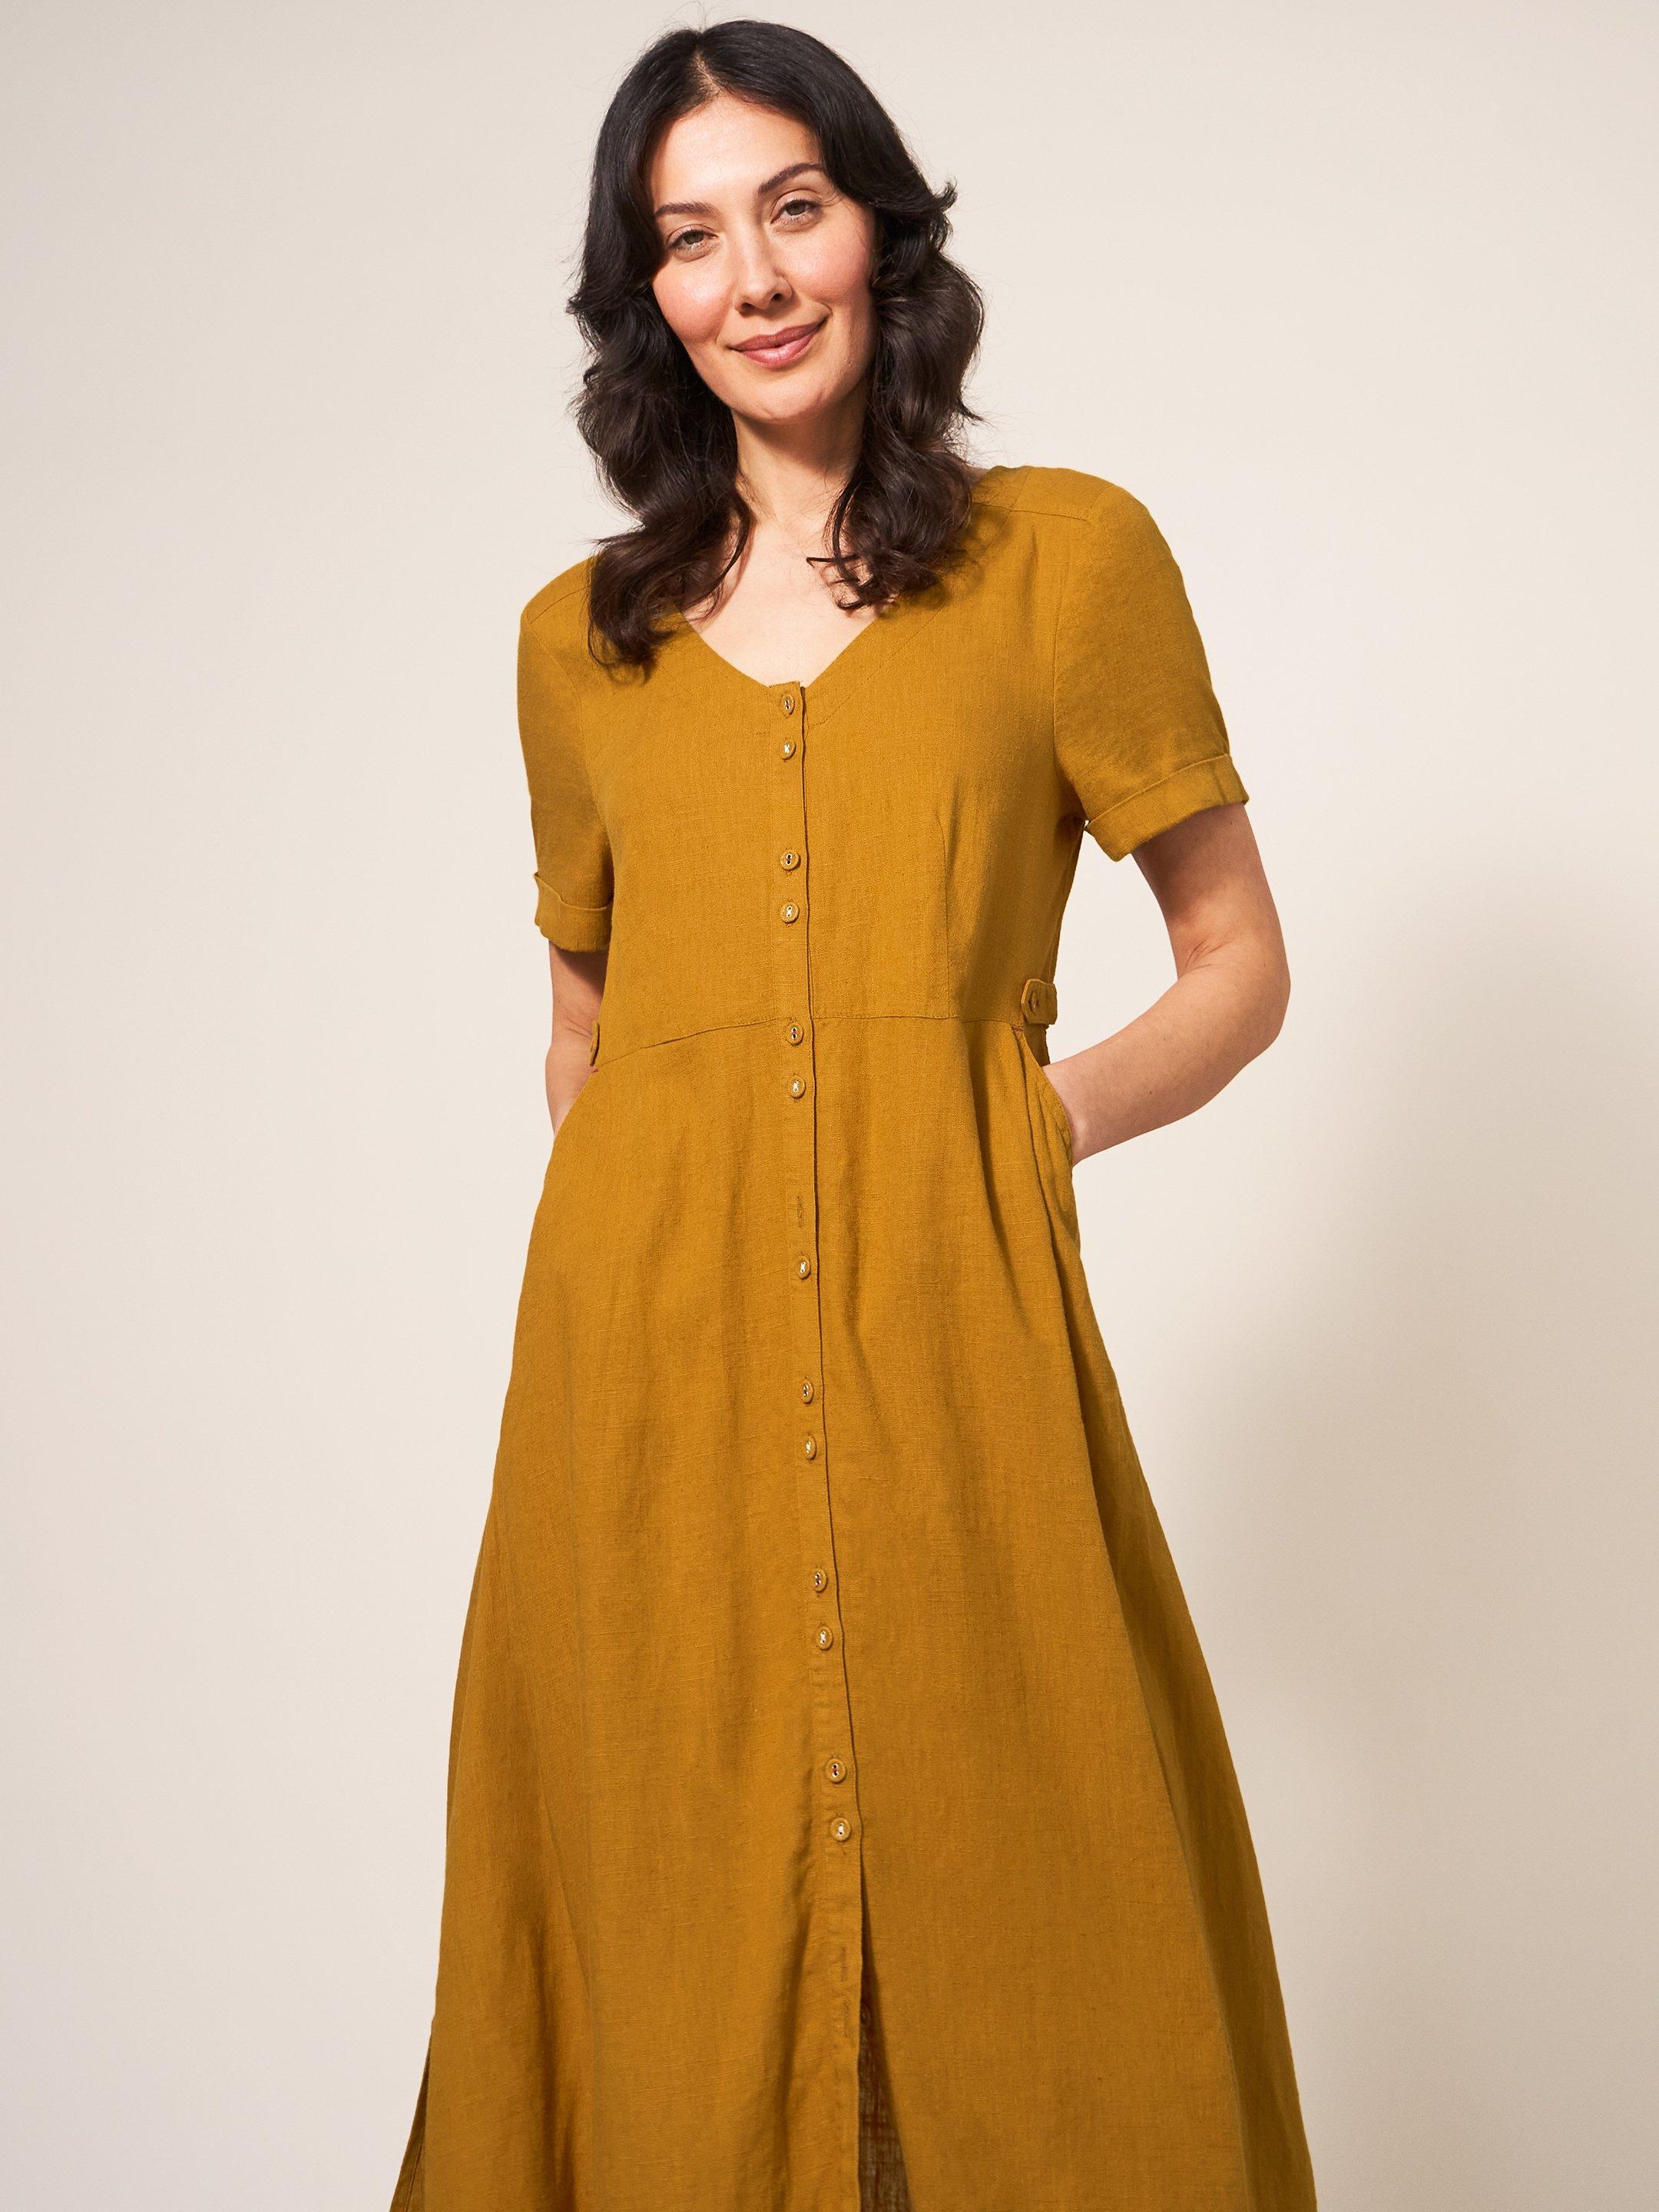 Ivy Dress in MID TAN - MODEL FRONT